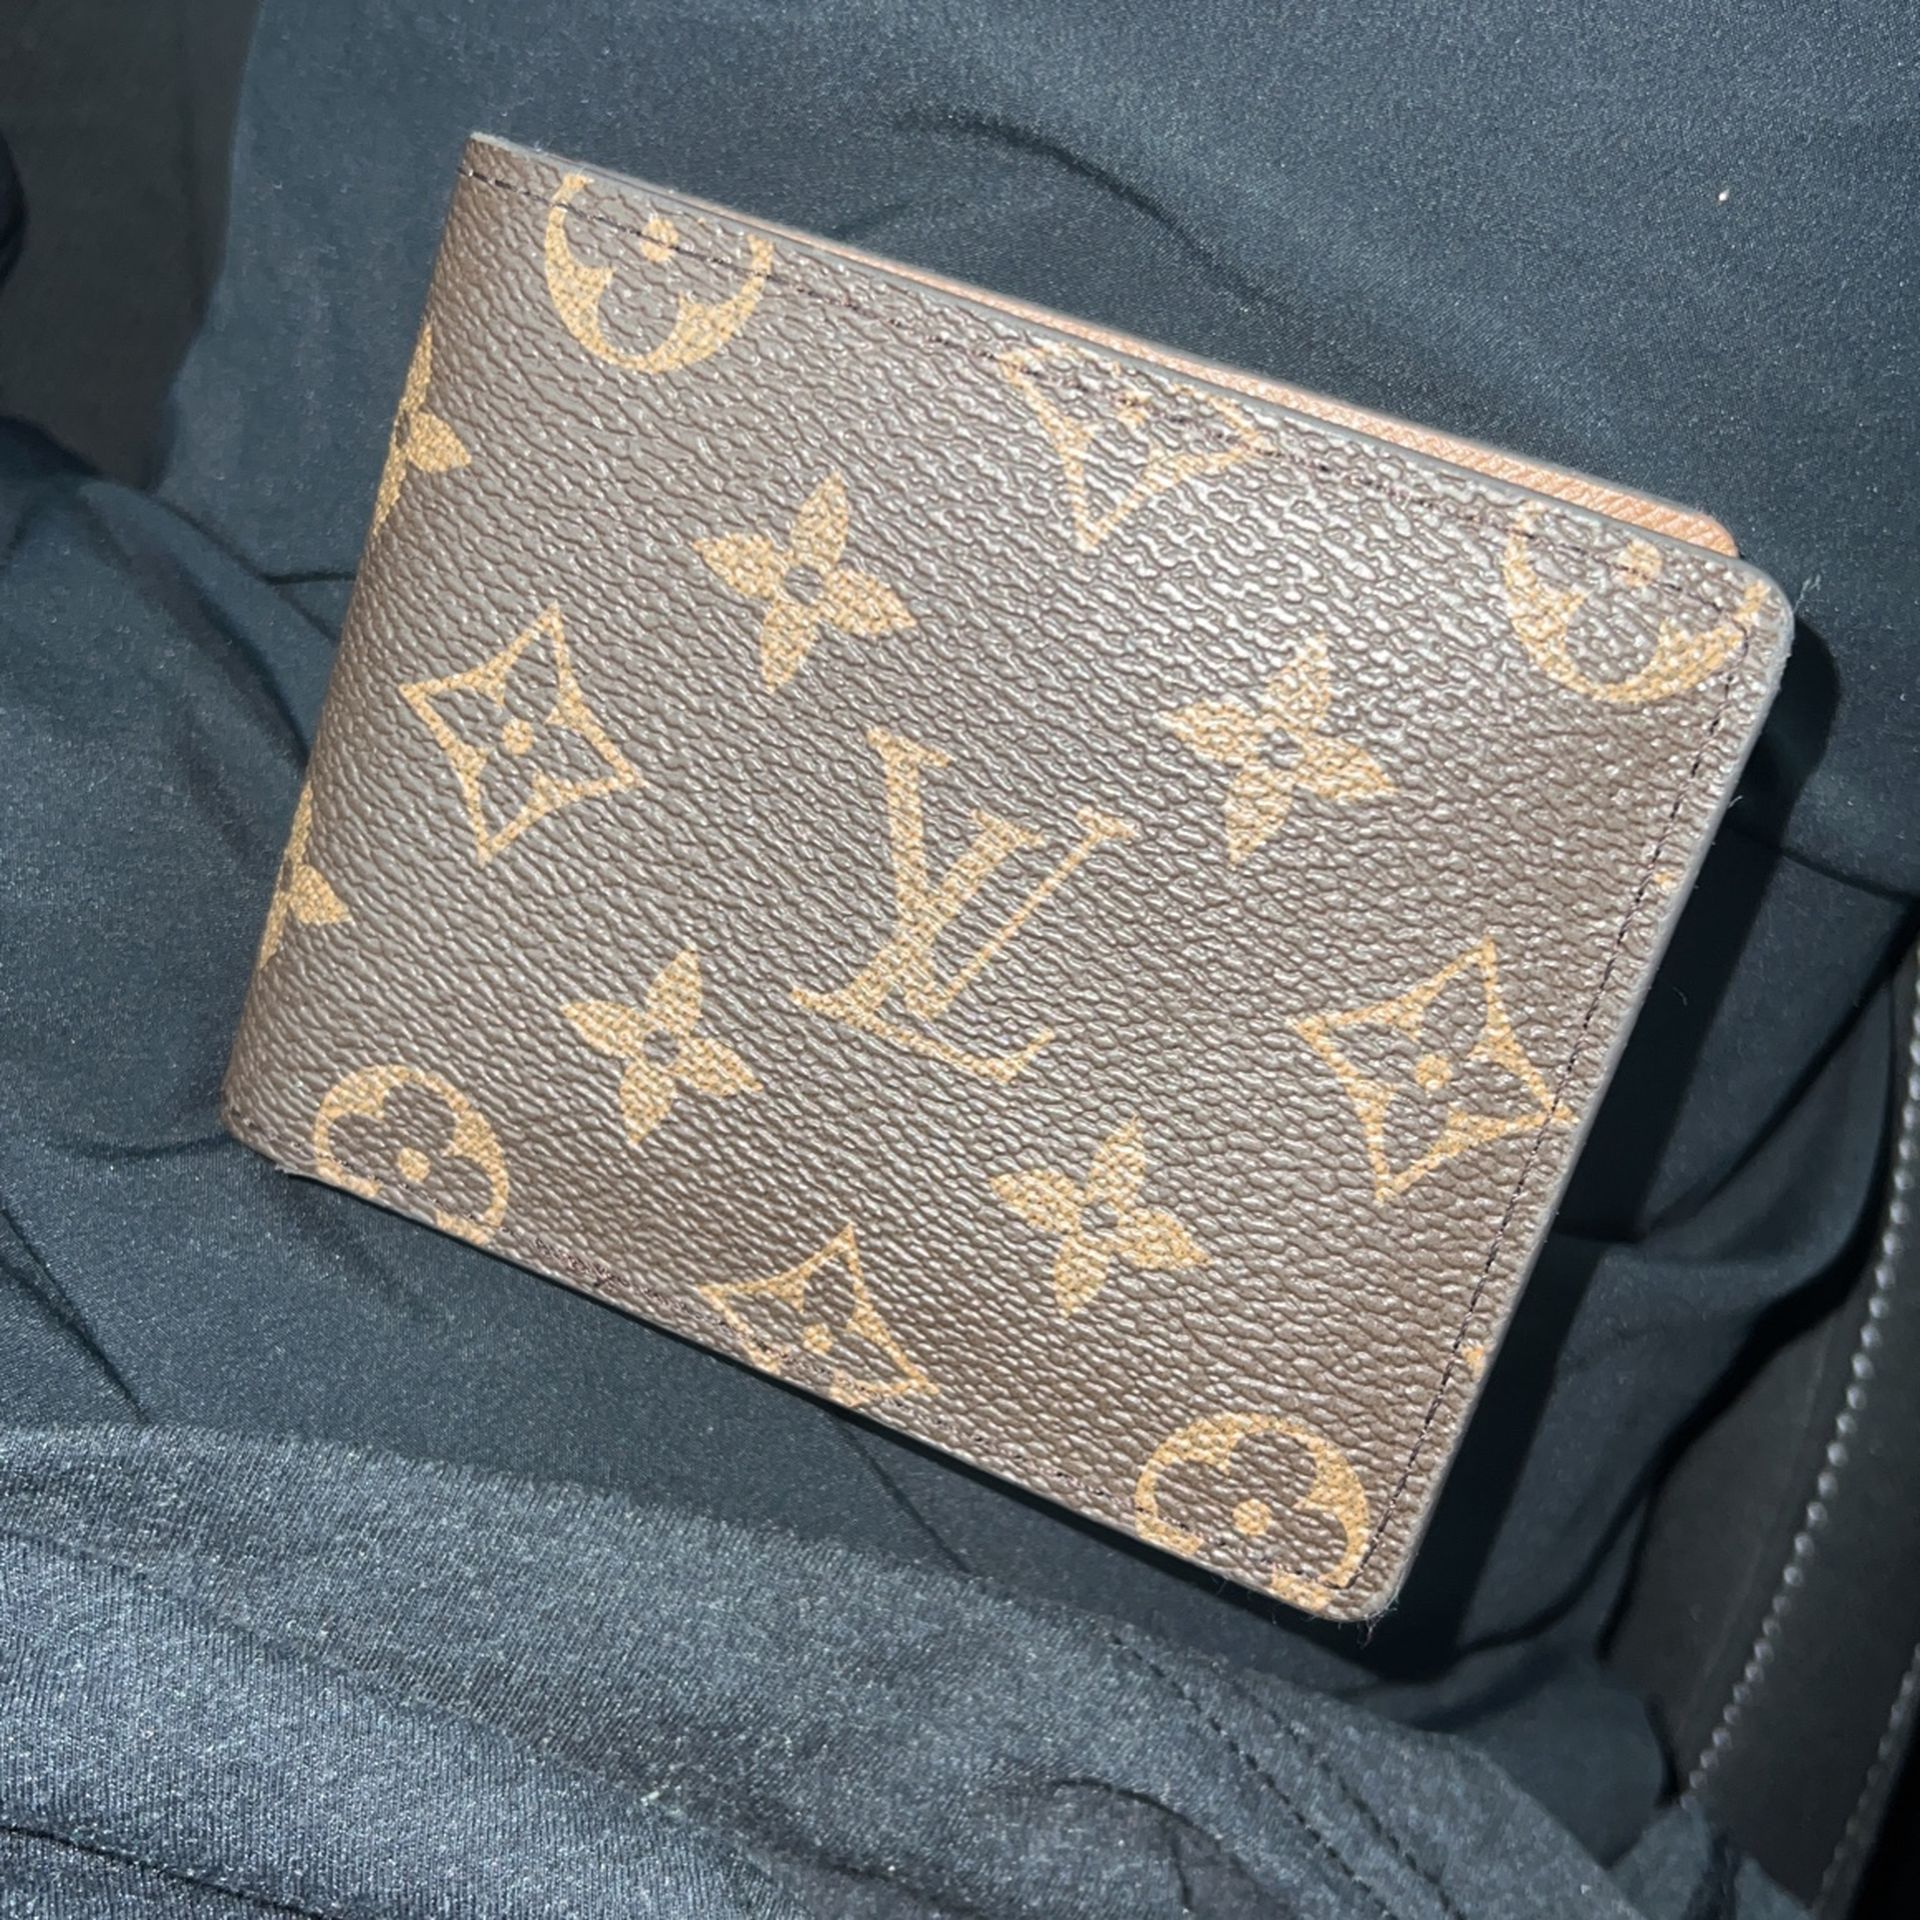 Lv Wallet, Give Me An Offer, Comes With Box 